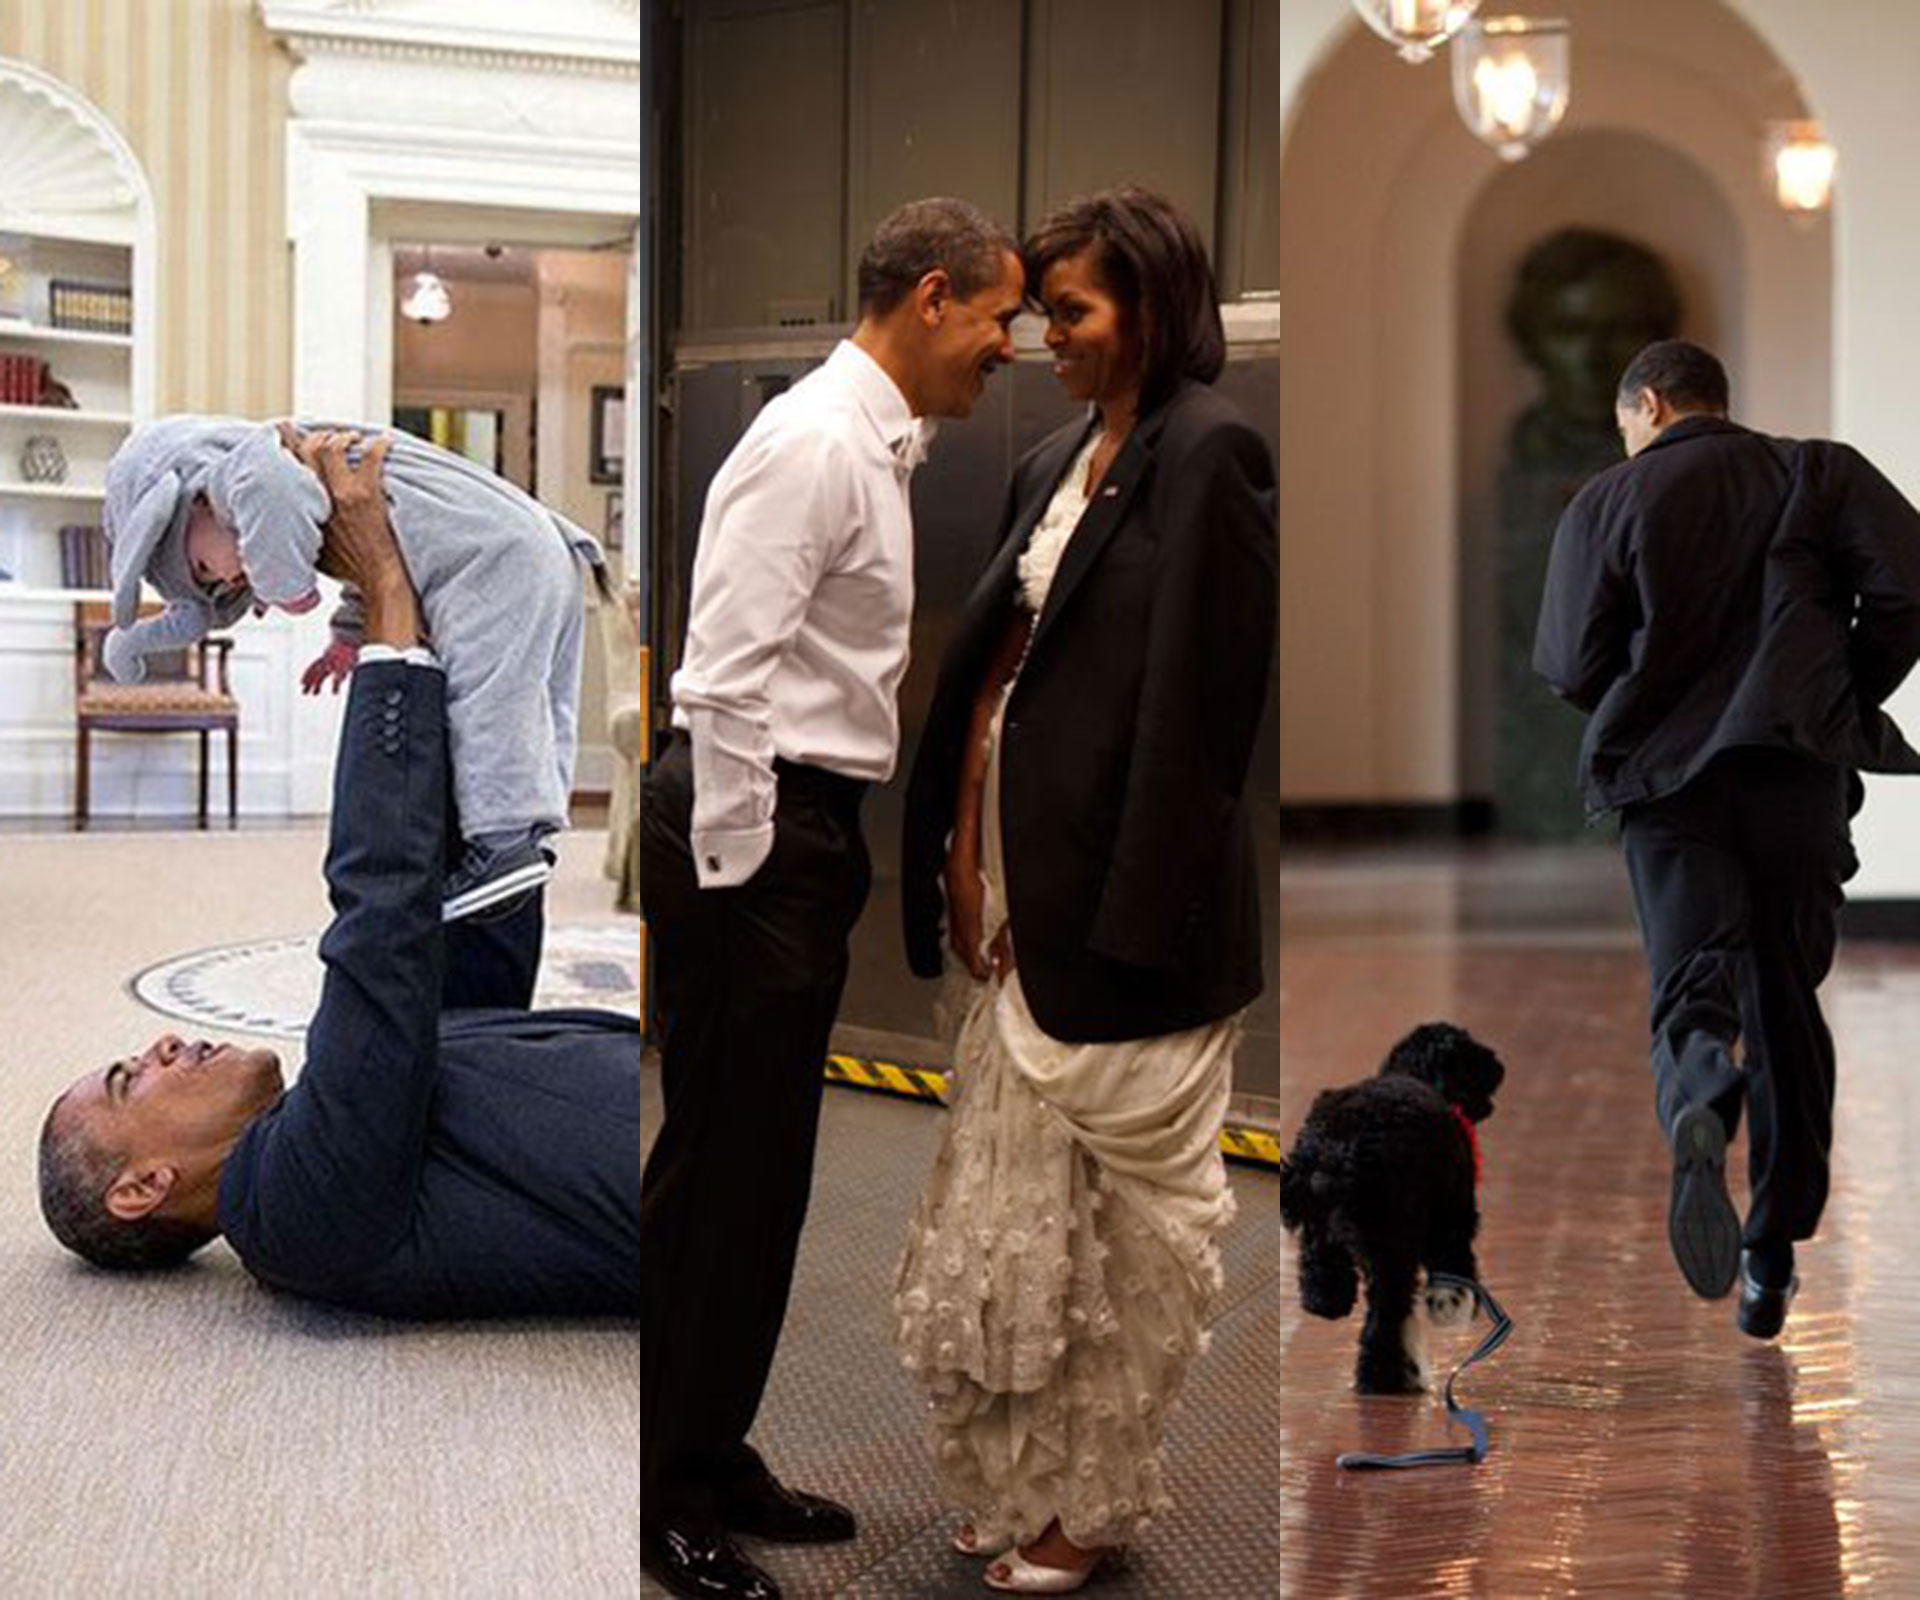 Official White House photographer picked his favourite Obama pictures and they’ll make you melt